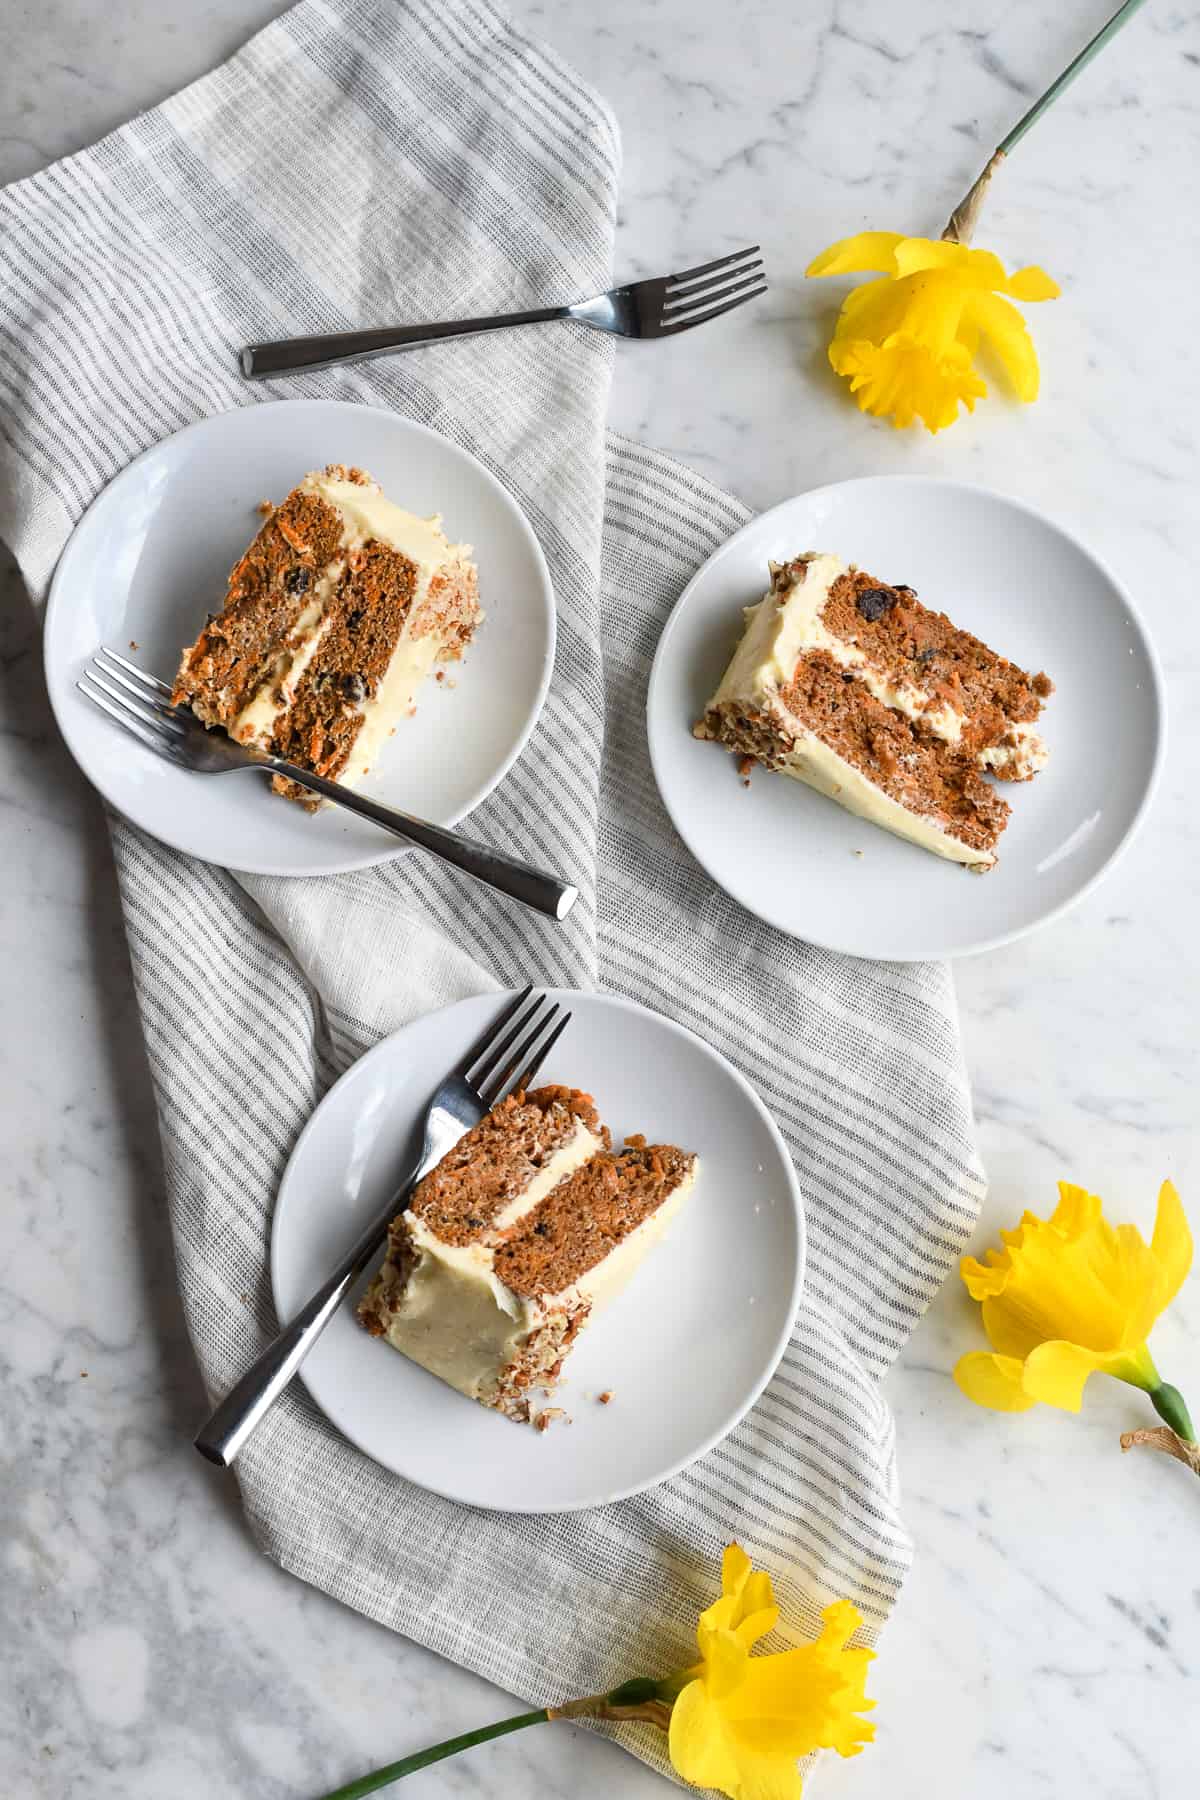 Best Gluten Free Carrot Cake 3 plates with slices